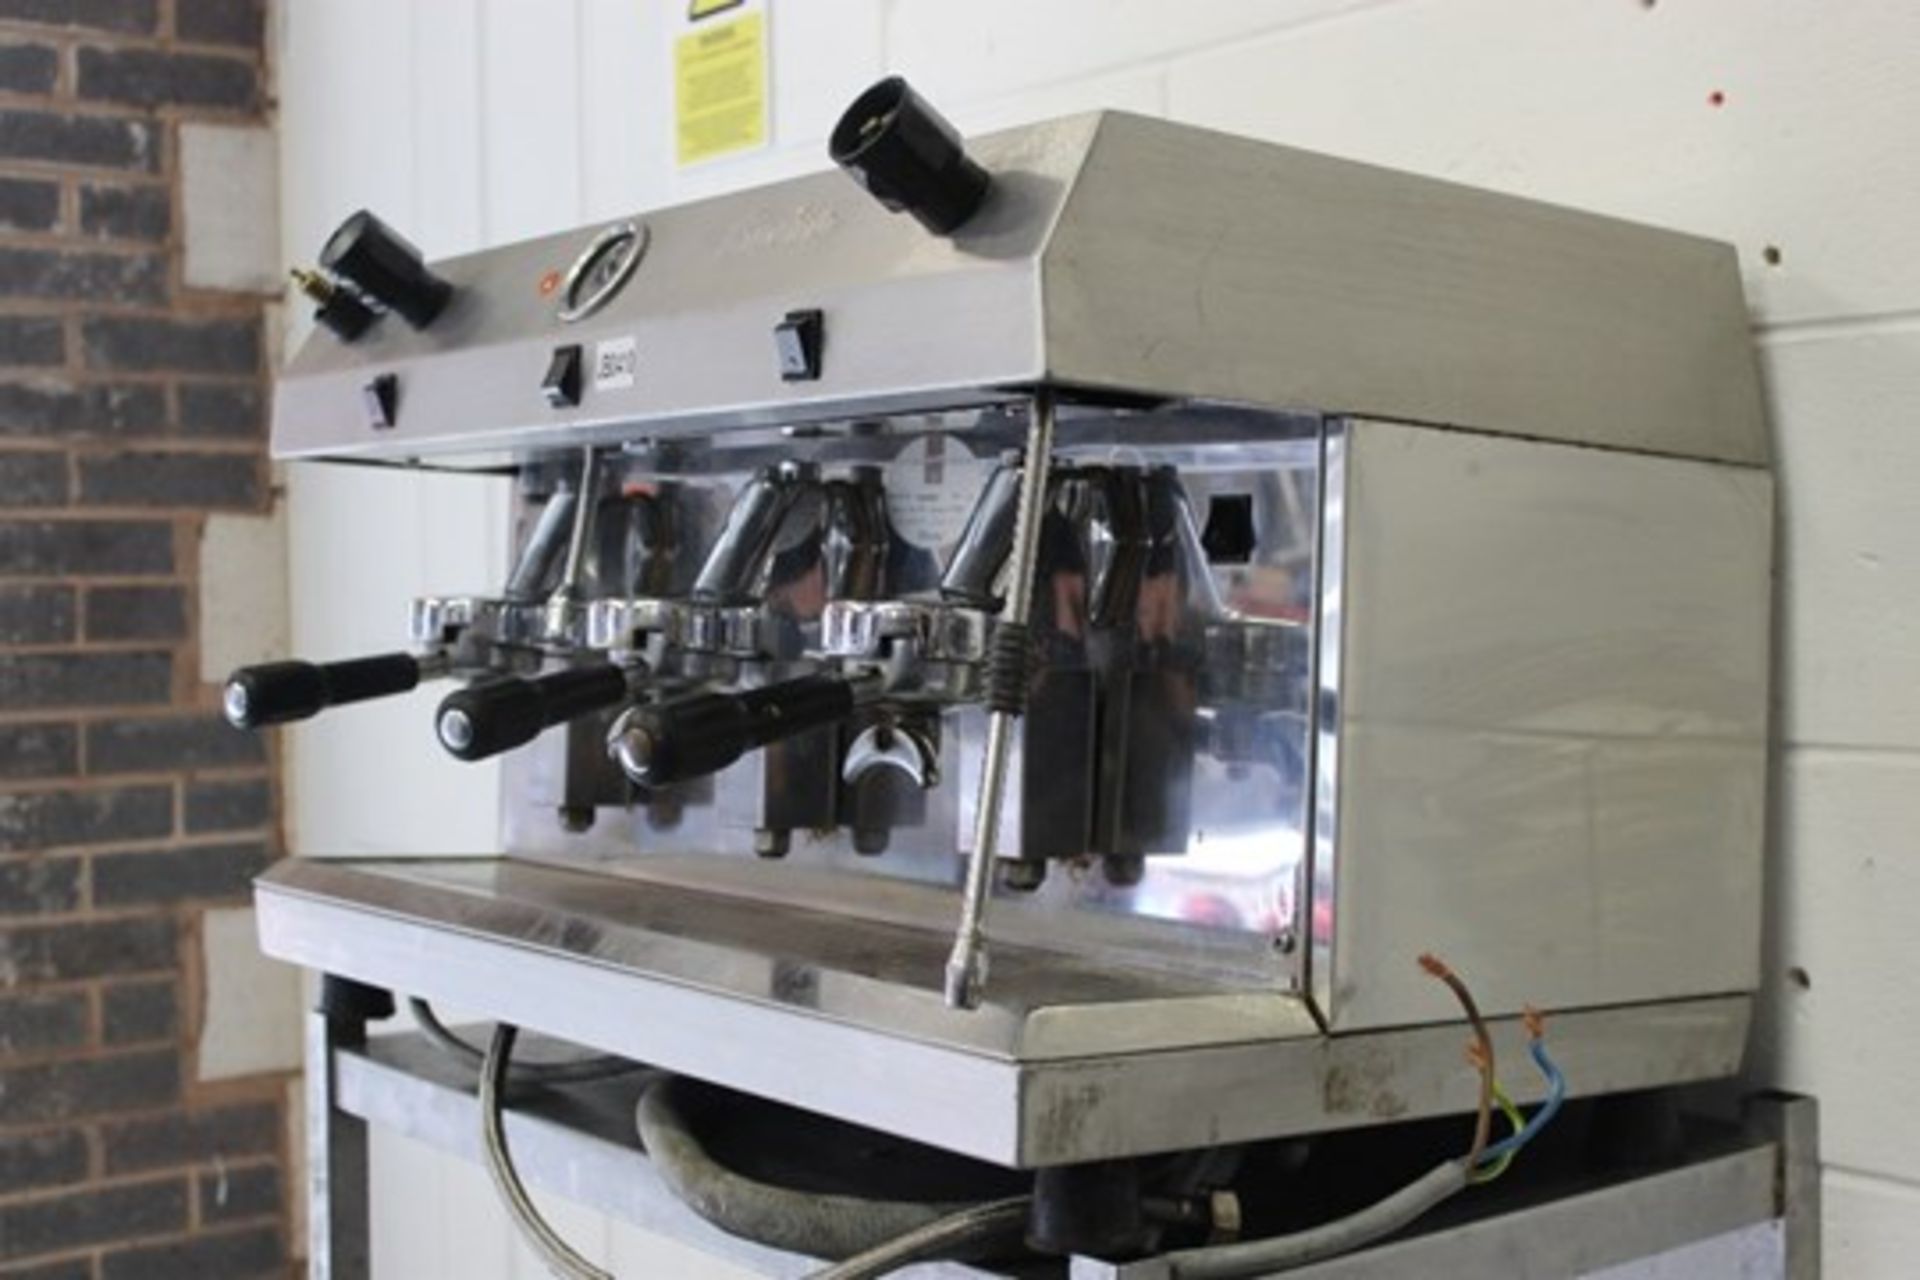 FRACINO 3 Group Group Espresso / Cappuccino Coffee Machine -1ph3 Group Handles – Model FCX3 – S/N - Image 3 of 3